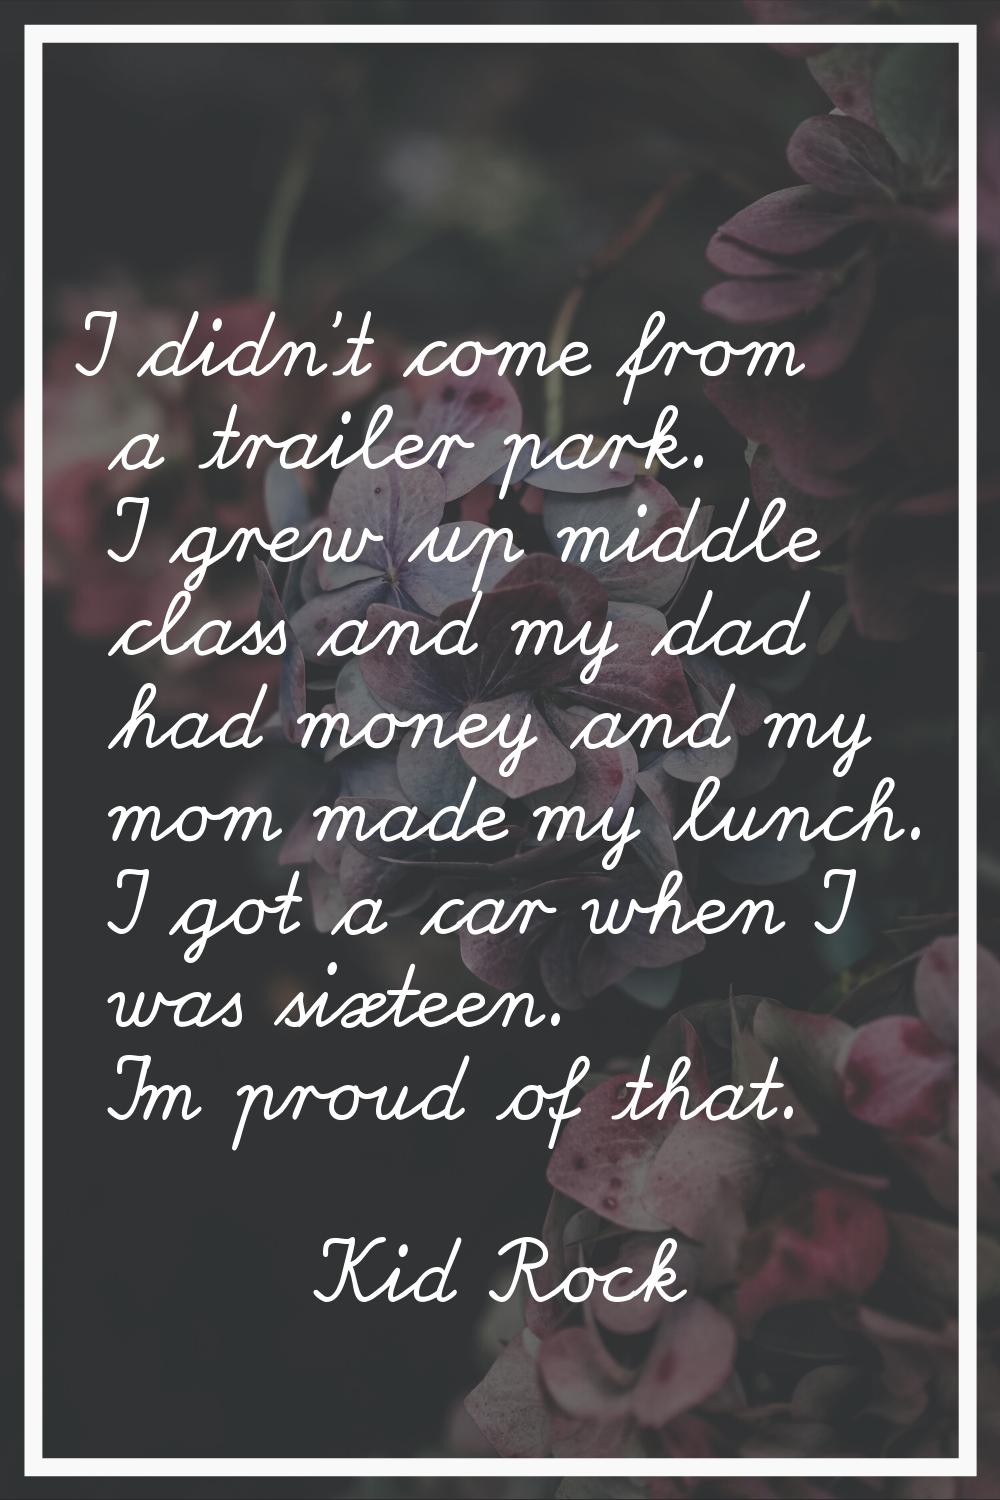 I didn't come from a trailer park. I grew up middle class and my dad had money and my mom made my l